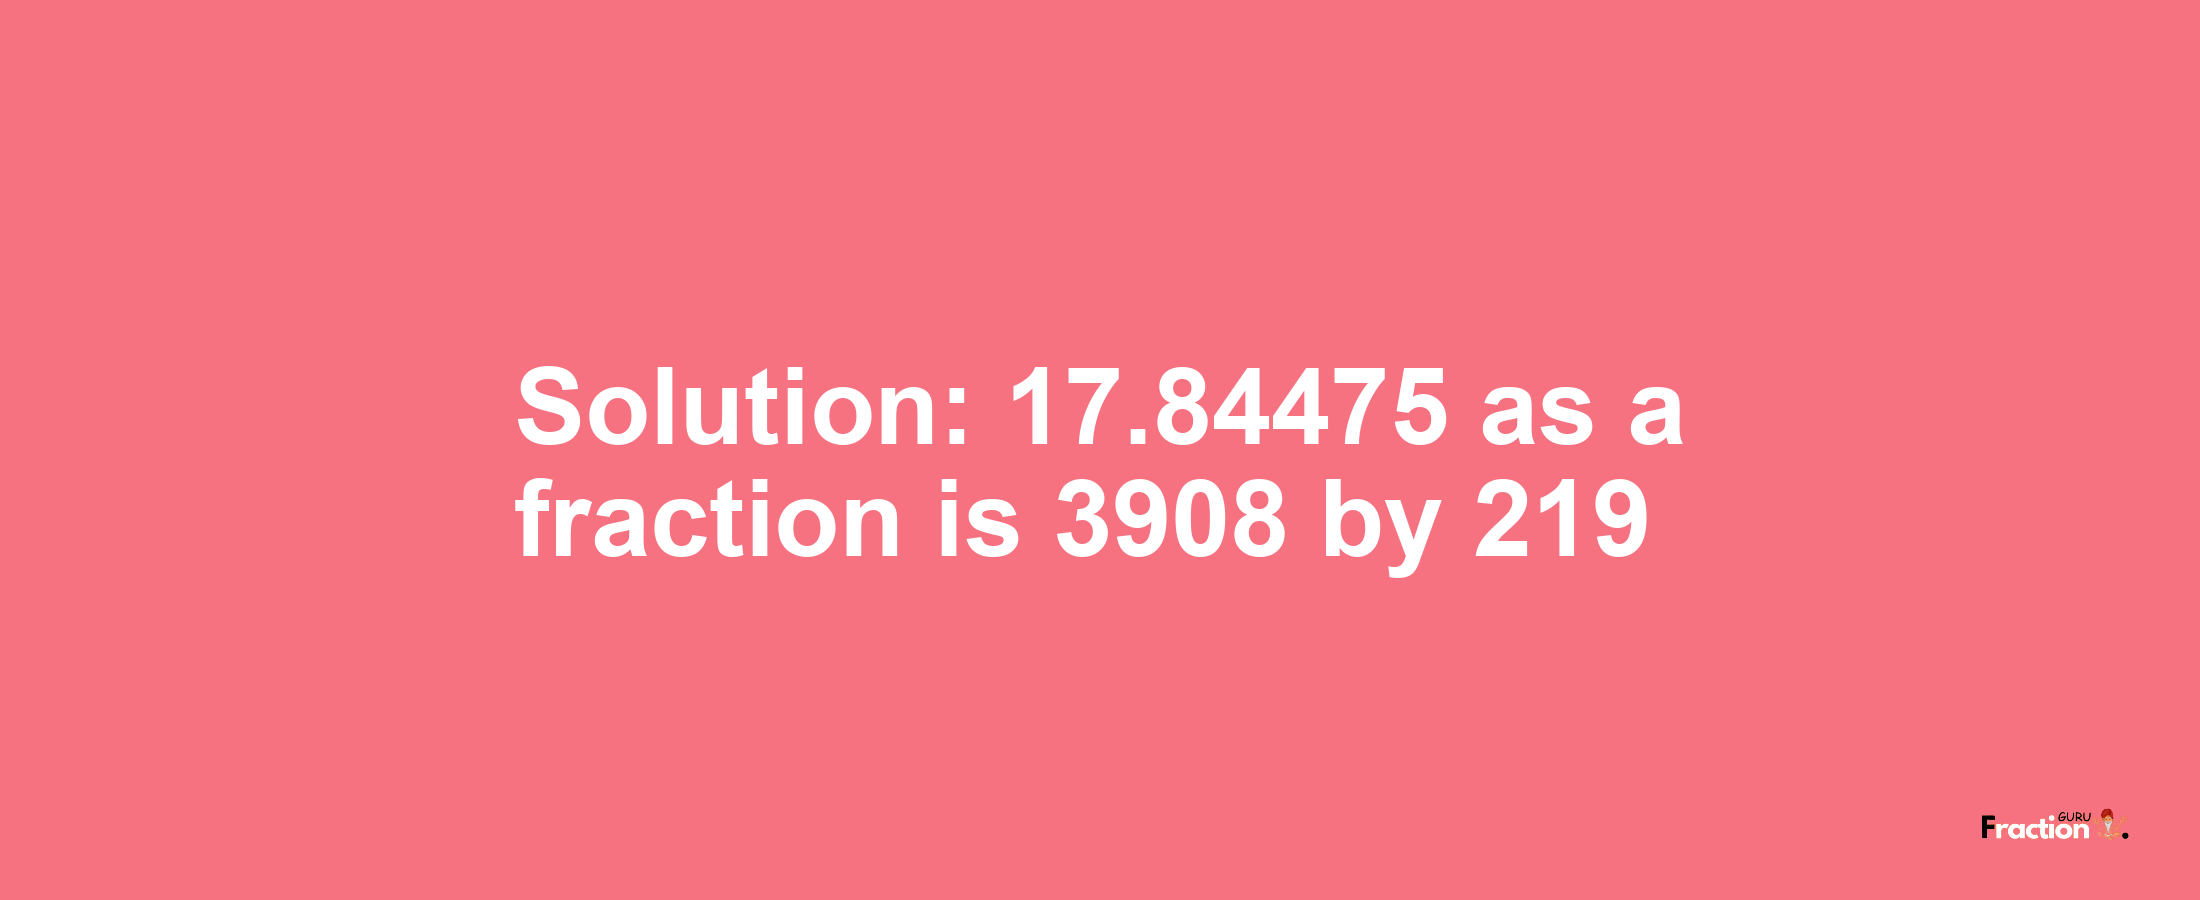 Solution:17.84475 as a fraction is 3908/219